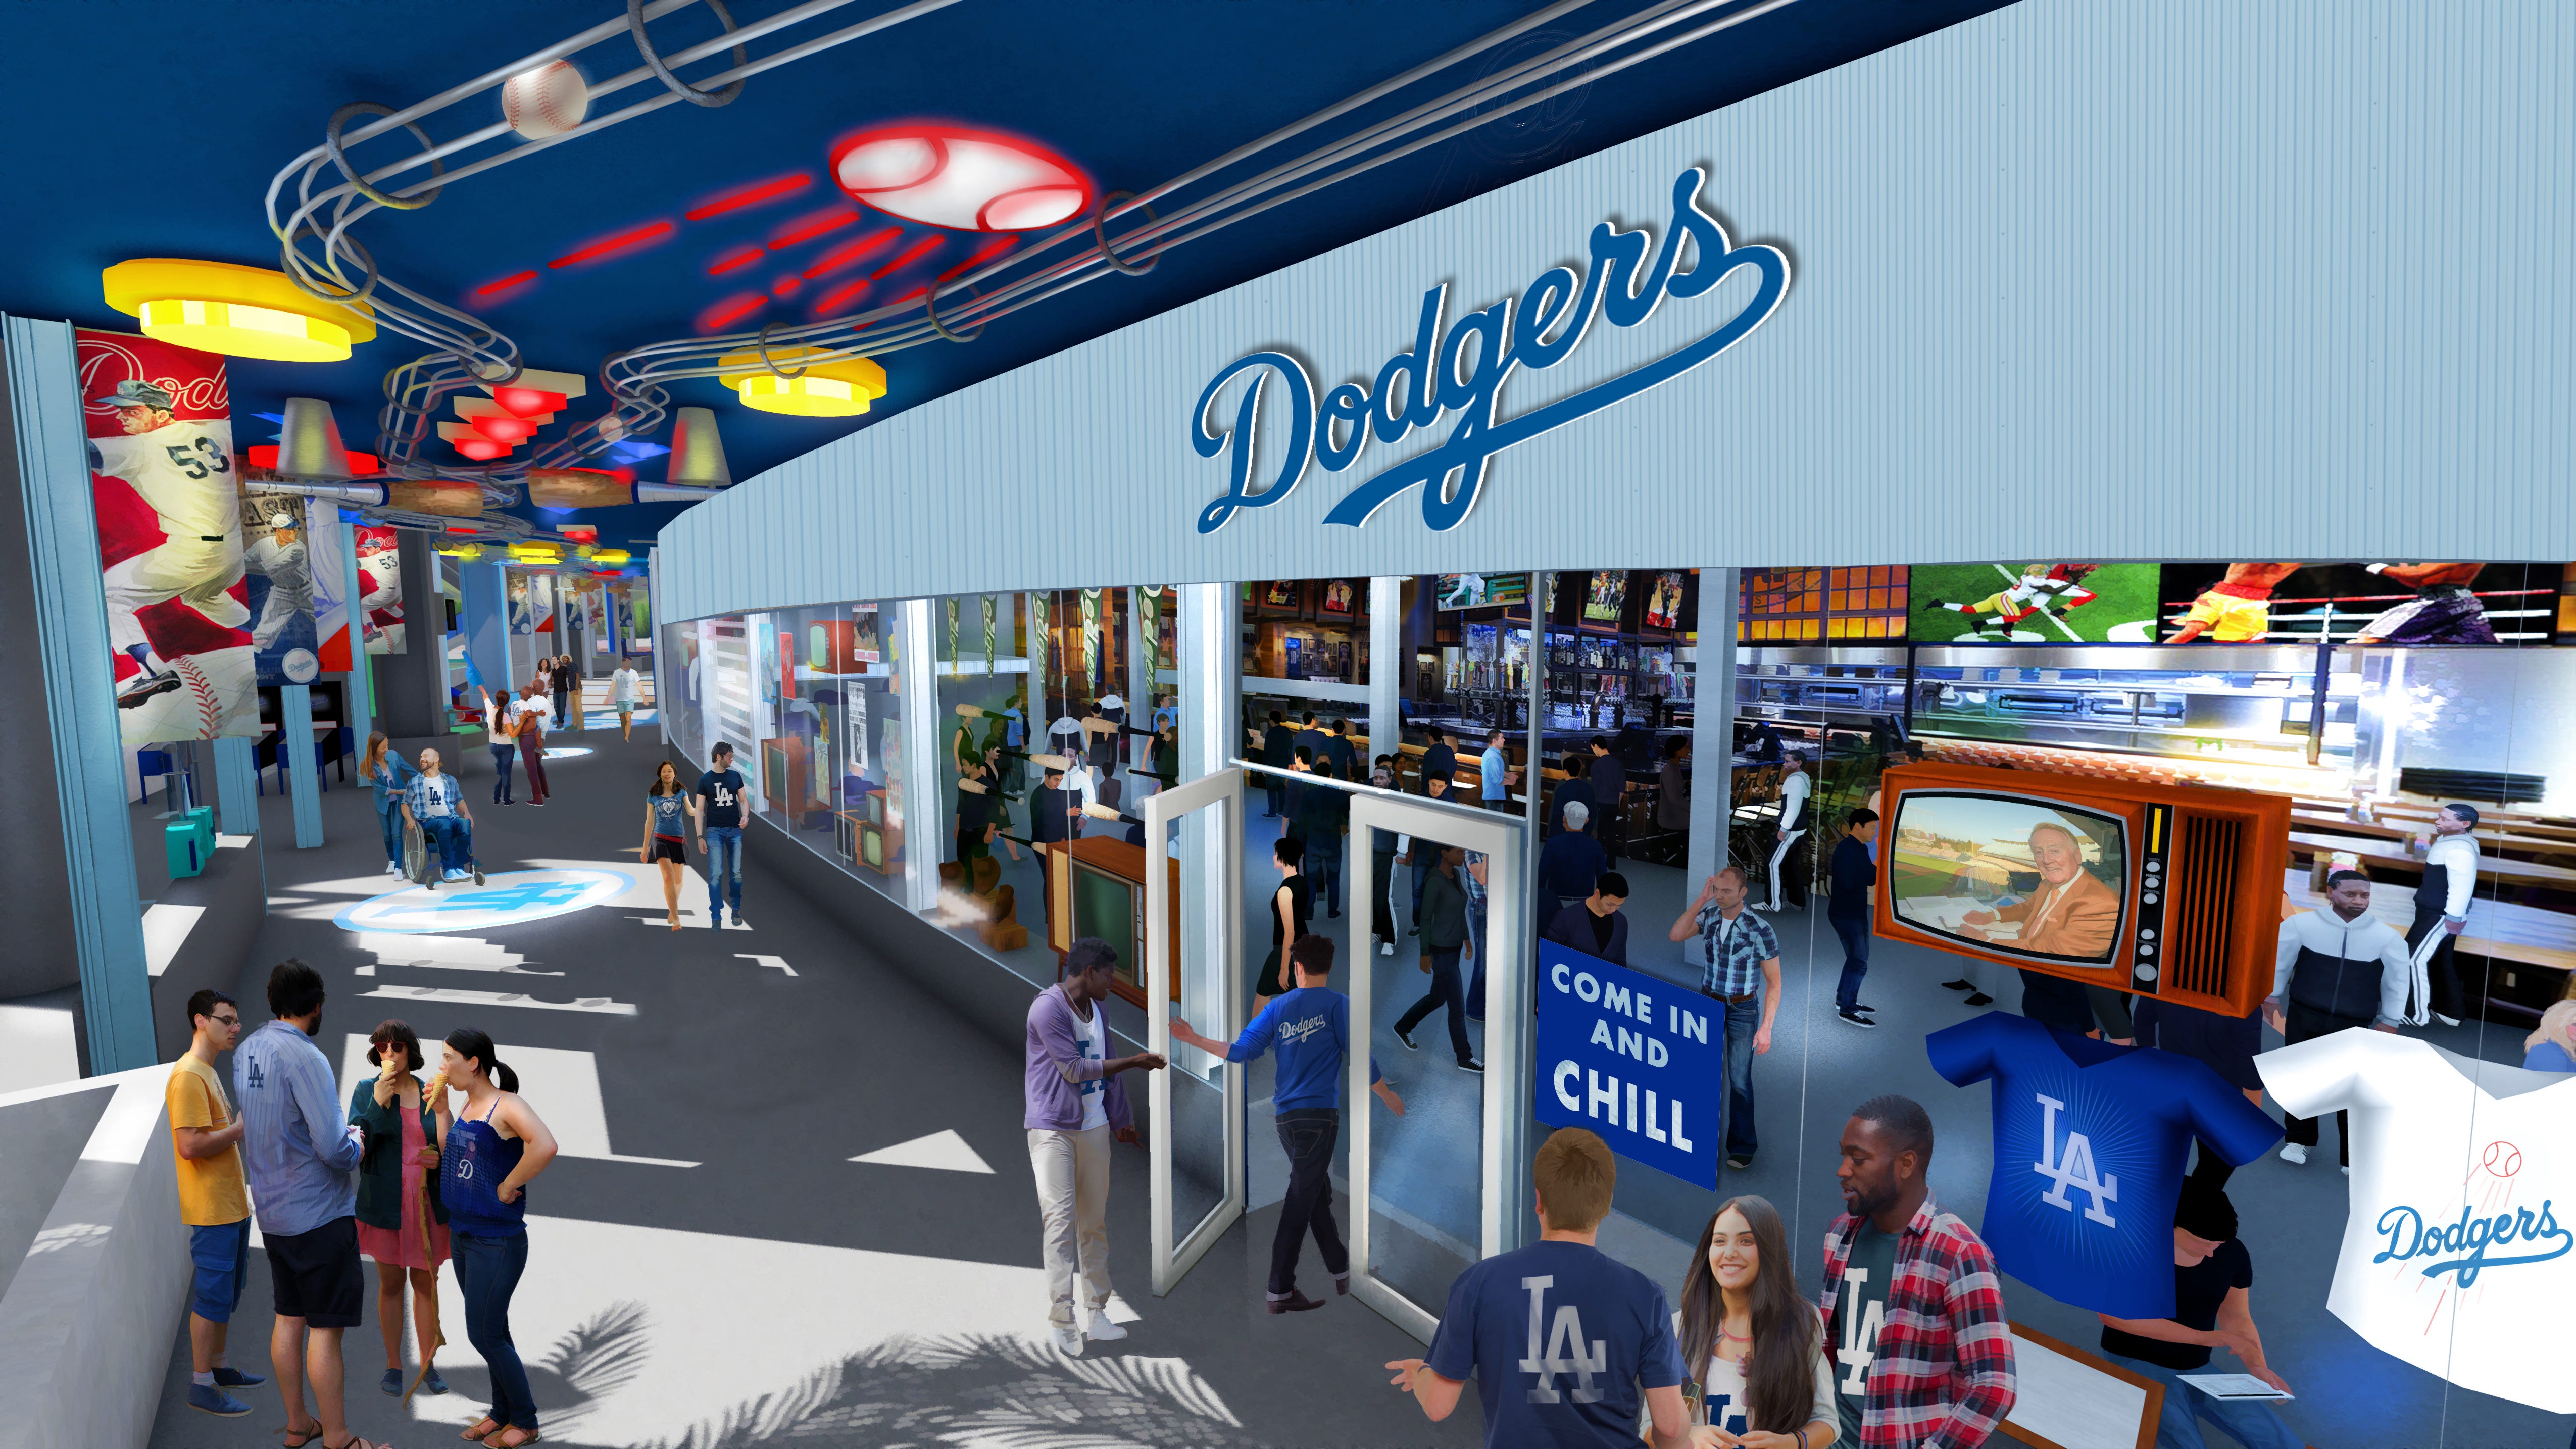 Dodgers to create centerfield plaza, renovated pavilions, Koufax